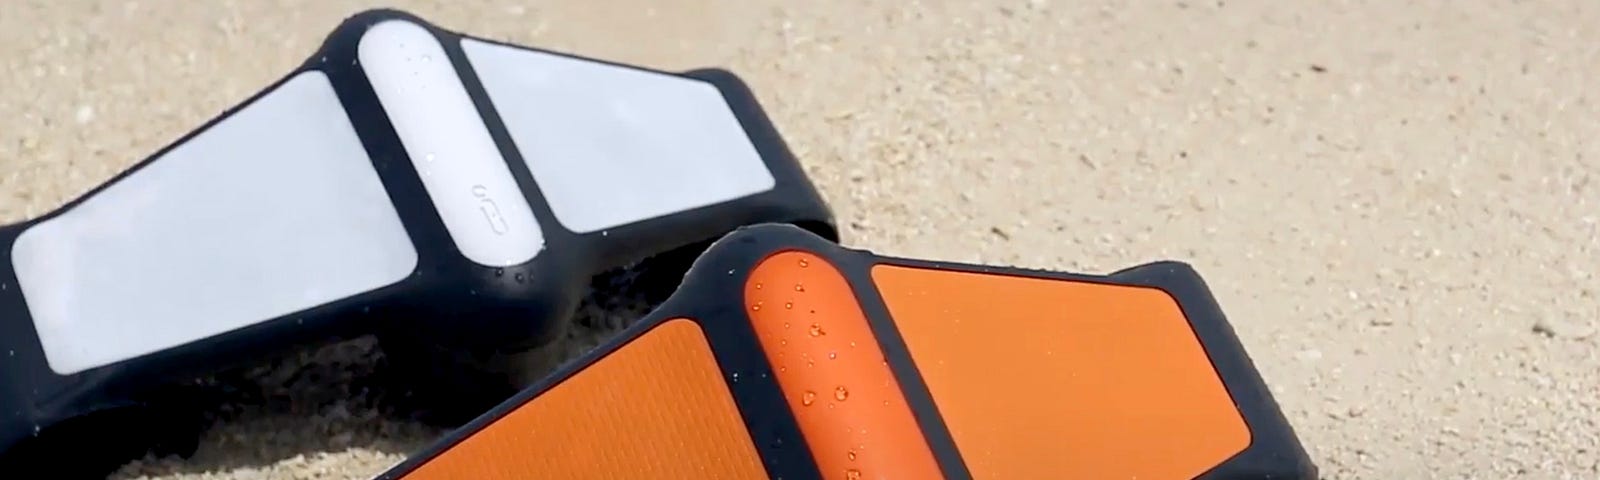 Two Geneinno S1 Pro underwater white and orange scooters sitting side-by-side on a sandy beach.